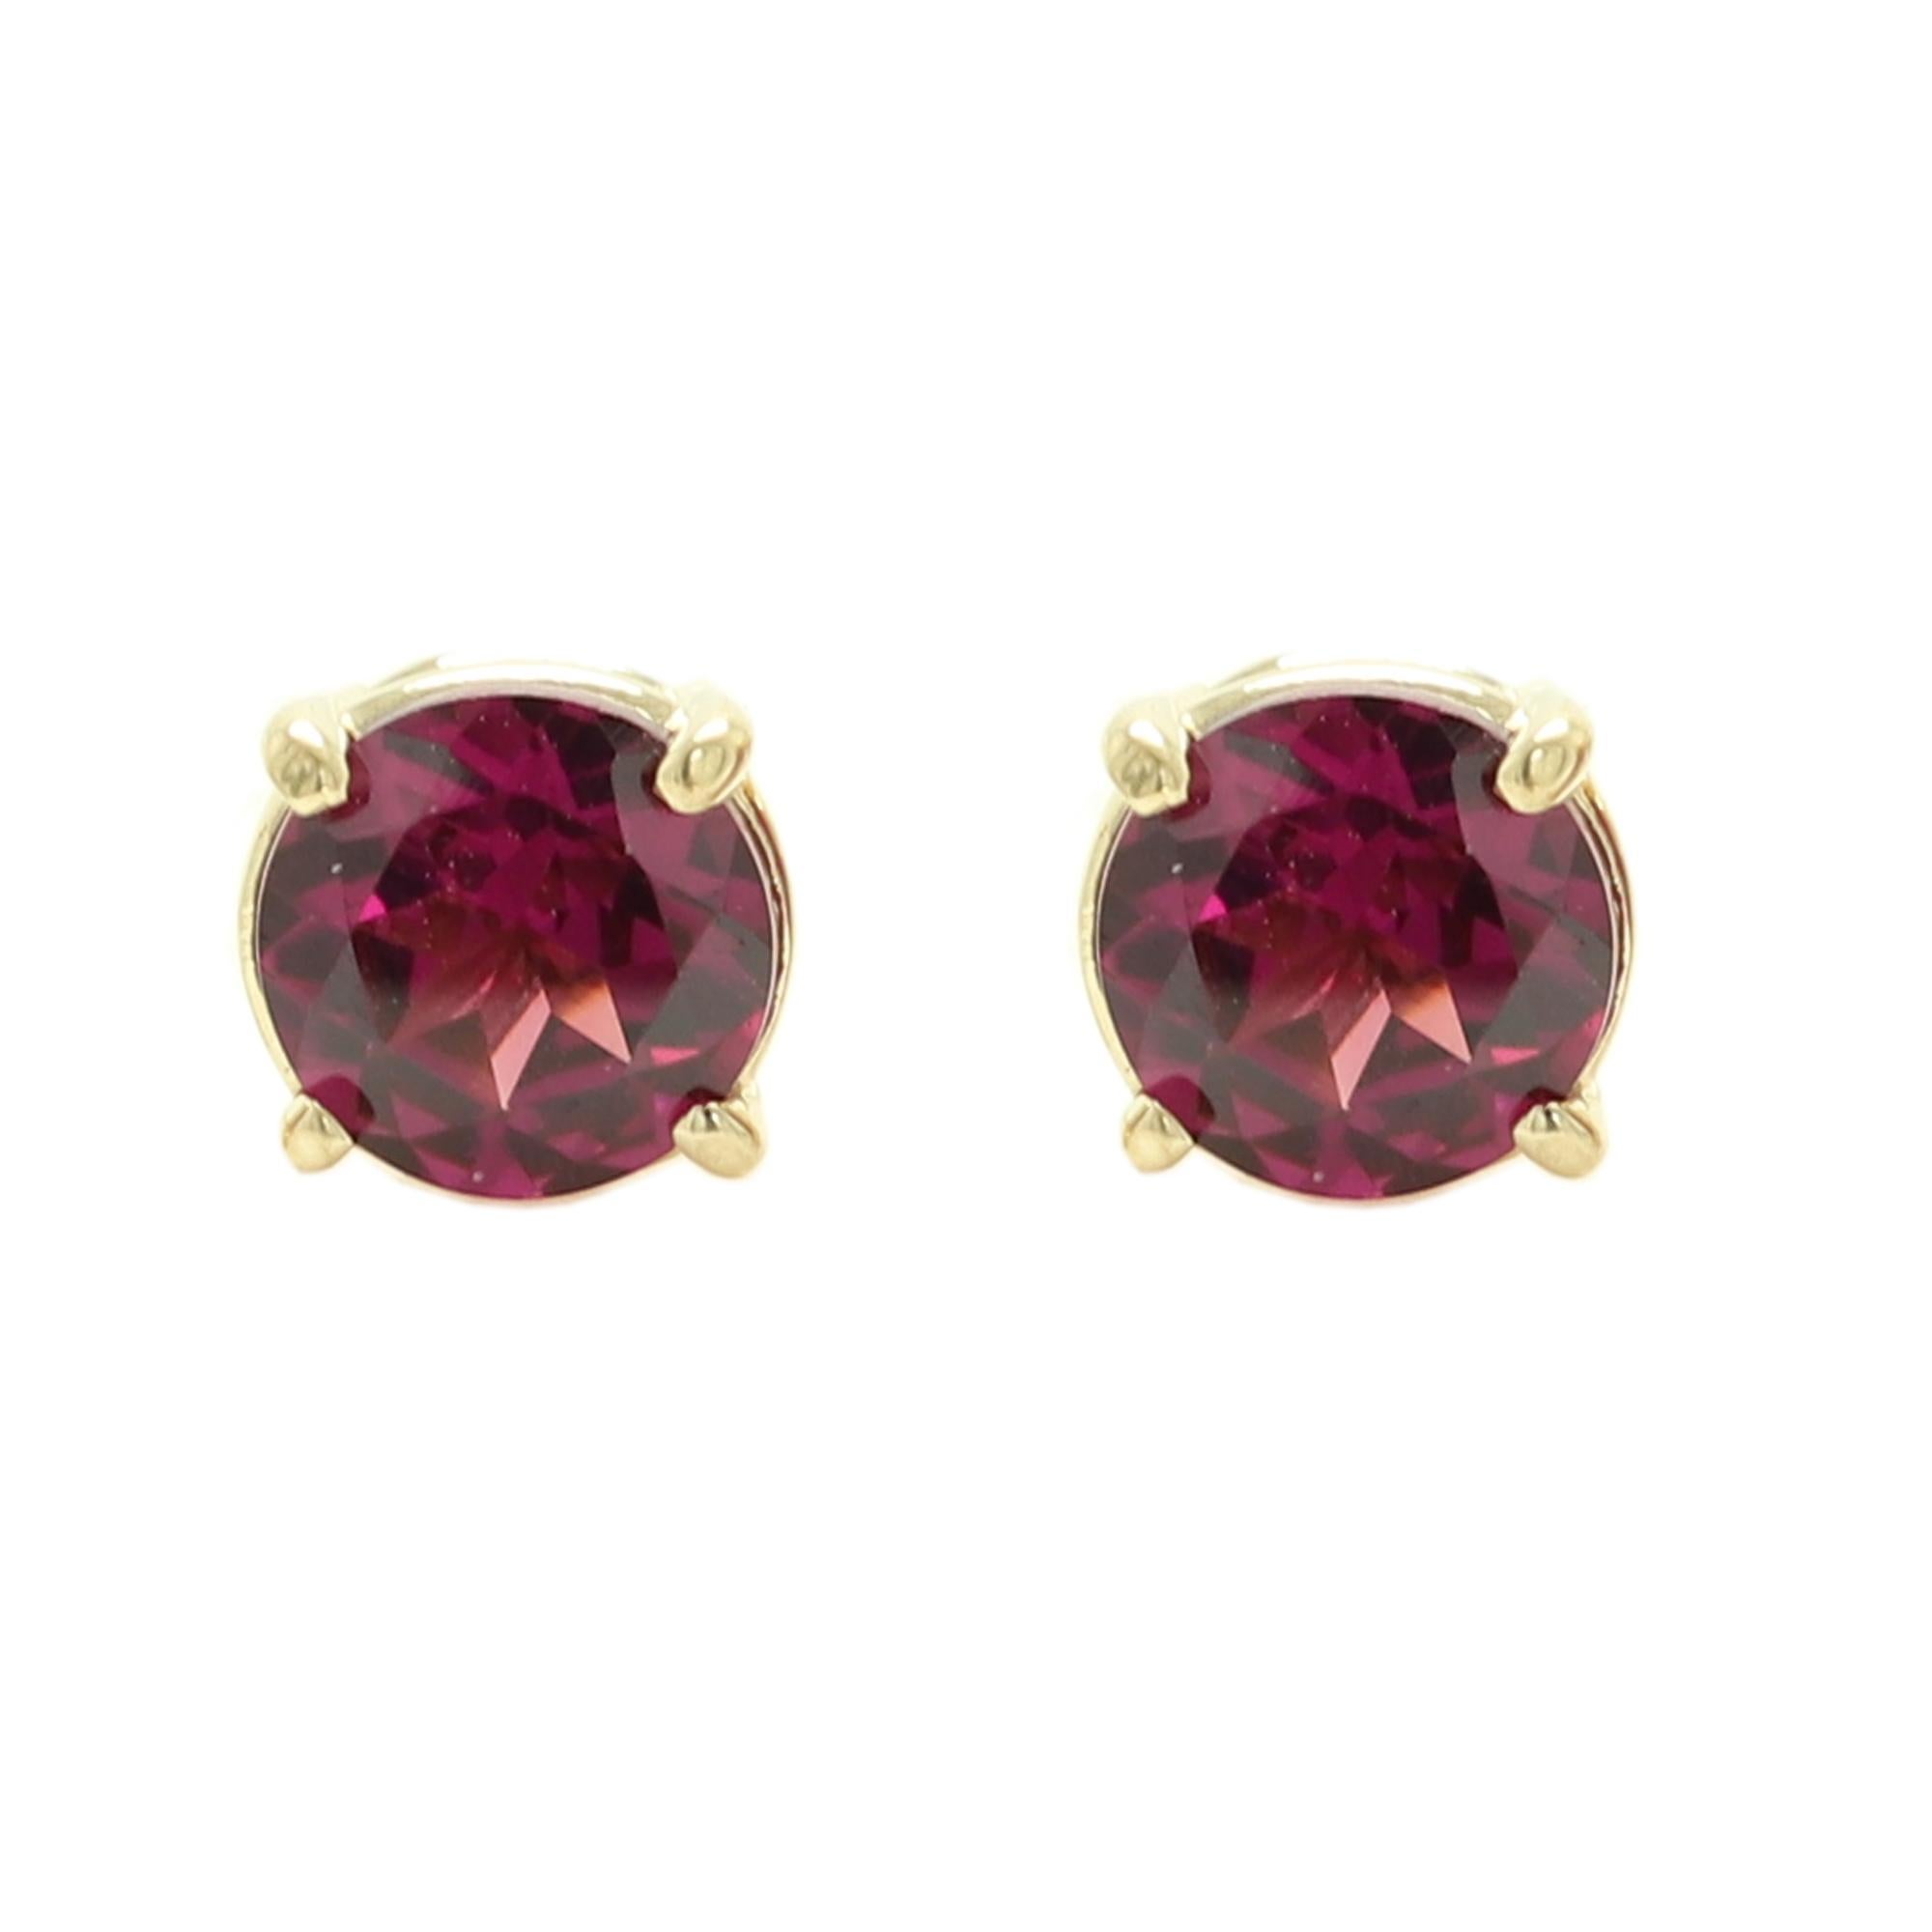 Natural Rhodolite gem Earring Studs
Approx. 6.0mm / 1.00 carat - each stone
The Actual color is similar to maroon 
Simple but Elegant and real natural gems 
Solid 14k yellow Gold approx weight 1.20 grams
with push back closures
Included a cute Gift